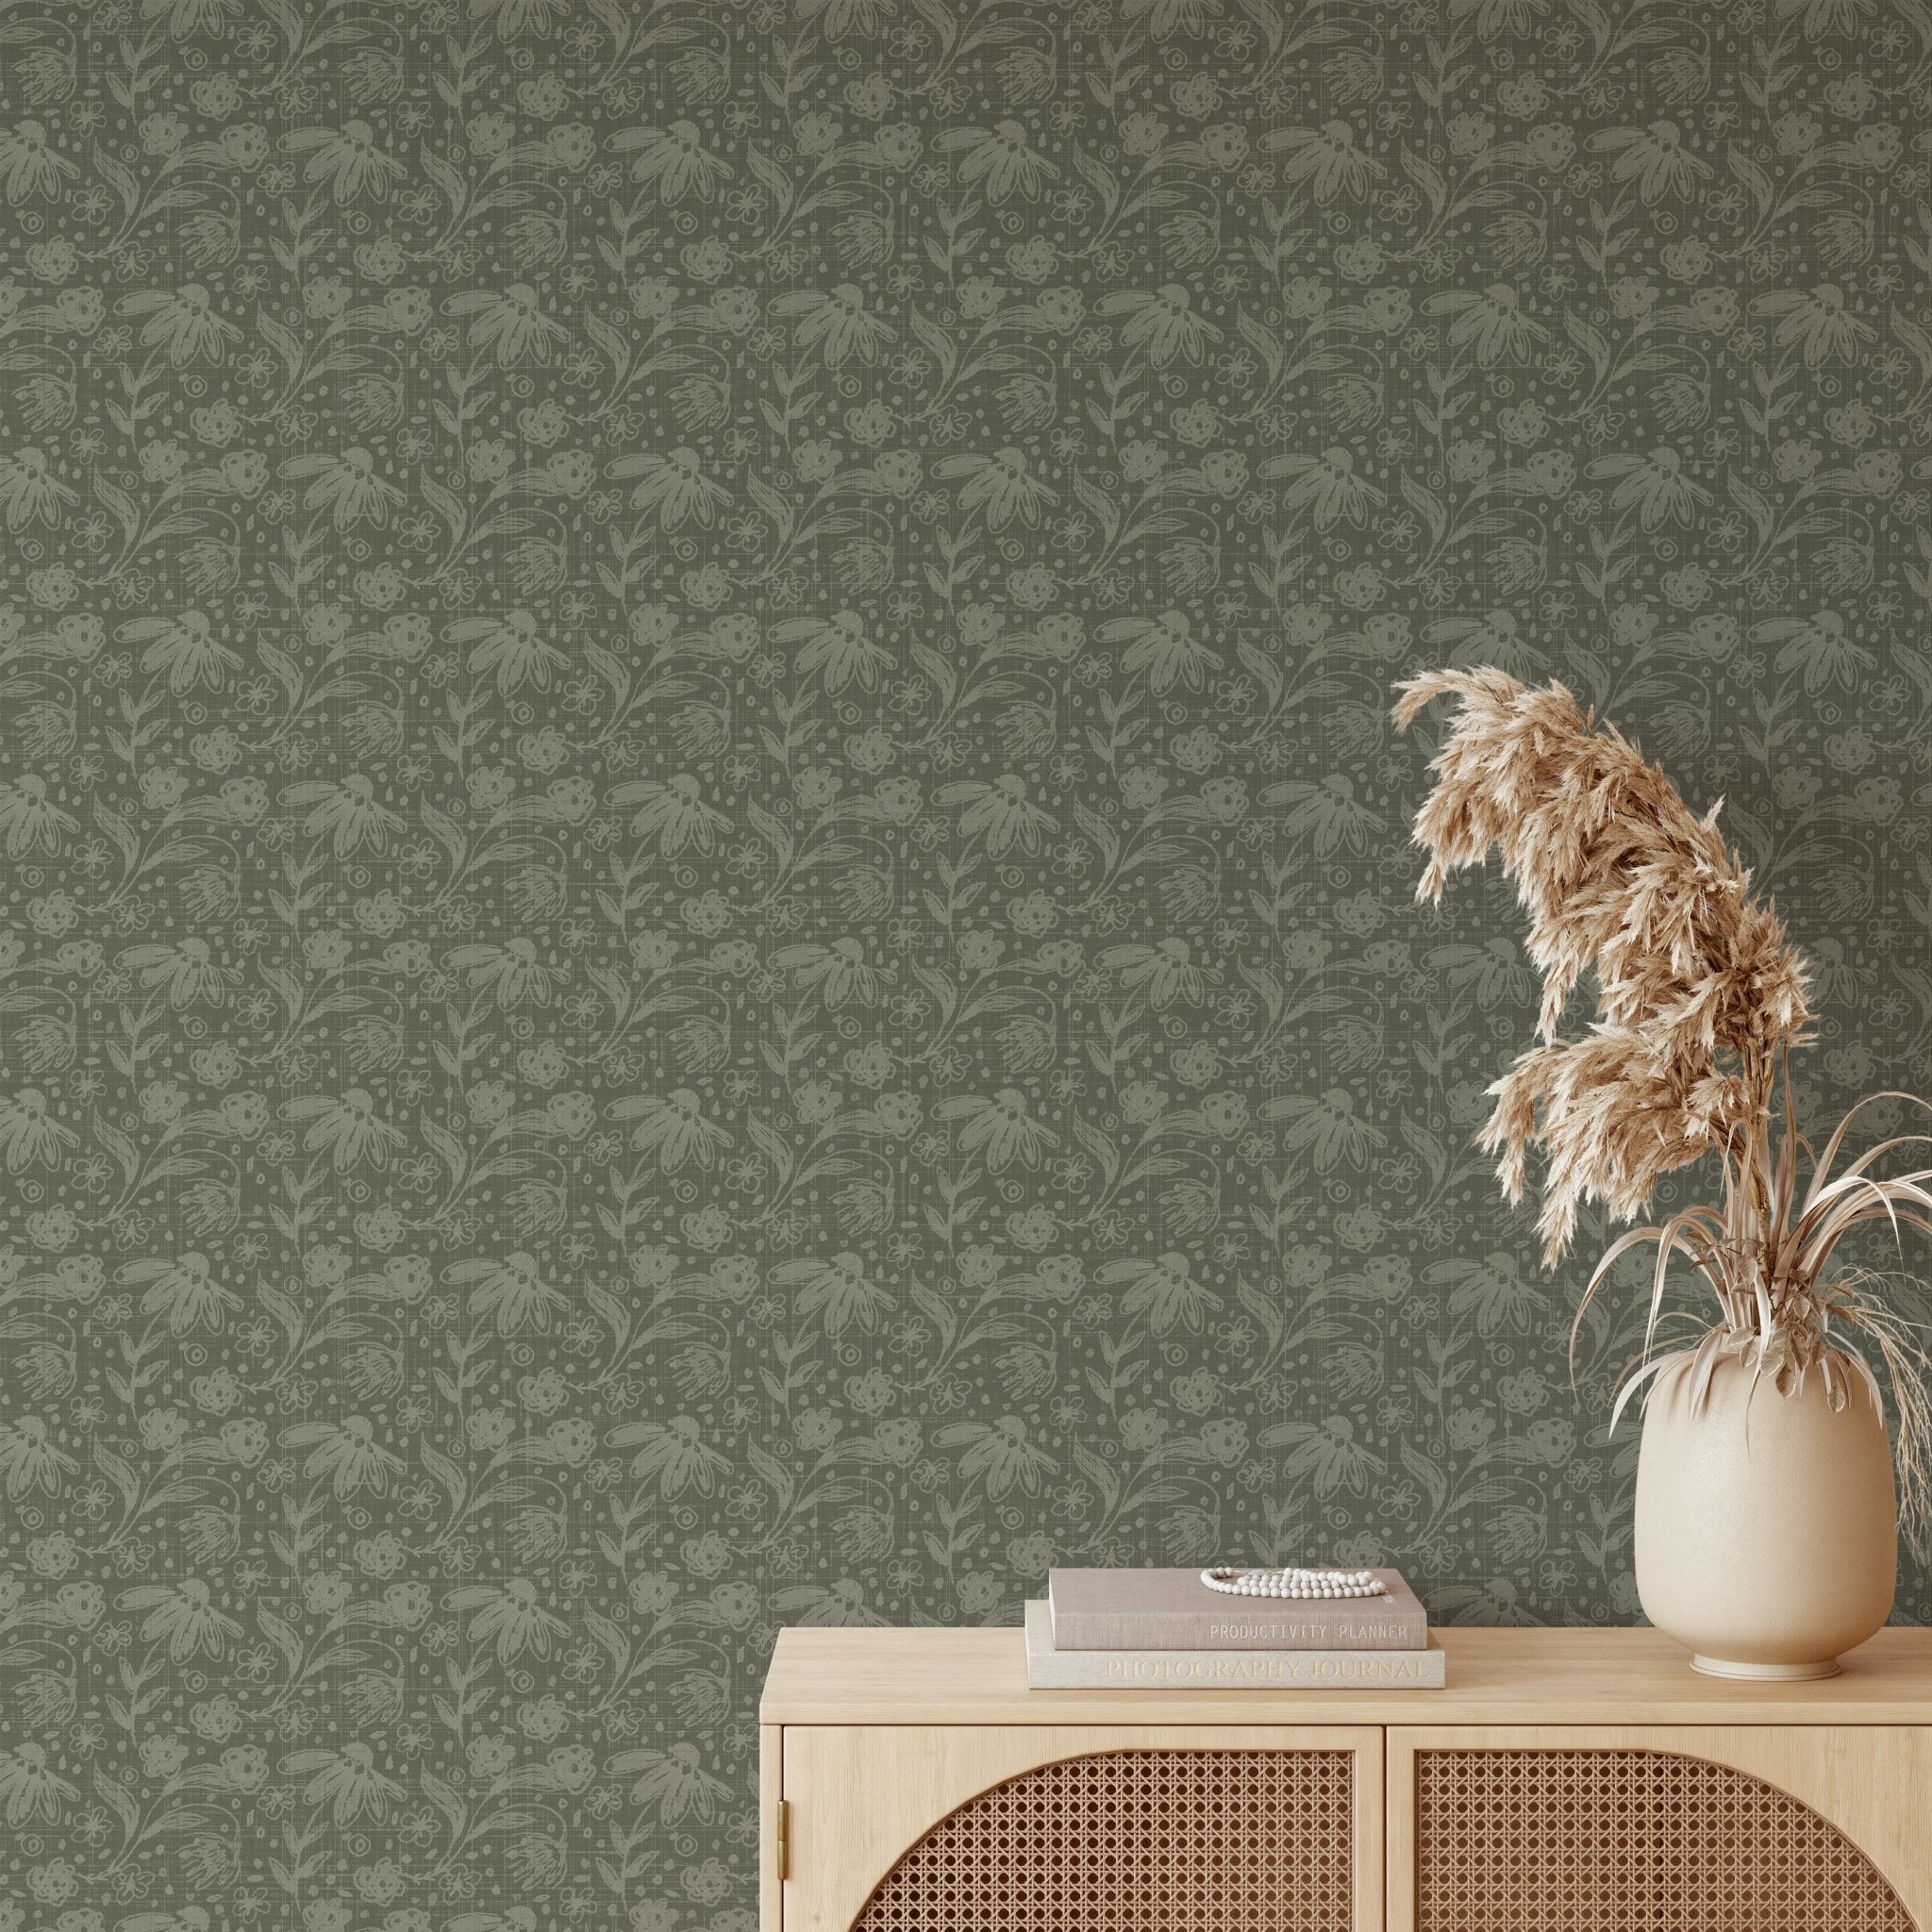 Lichen Green Peel and Stick Removable Wallpapers